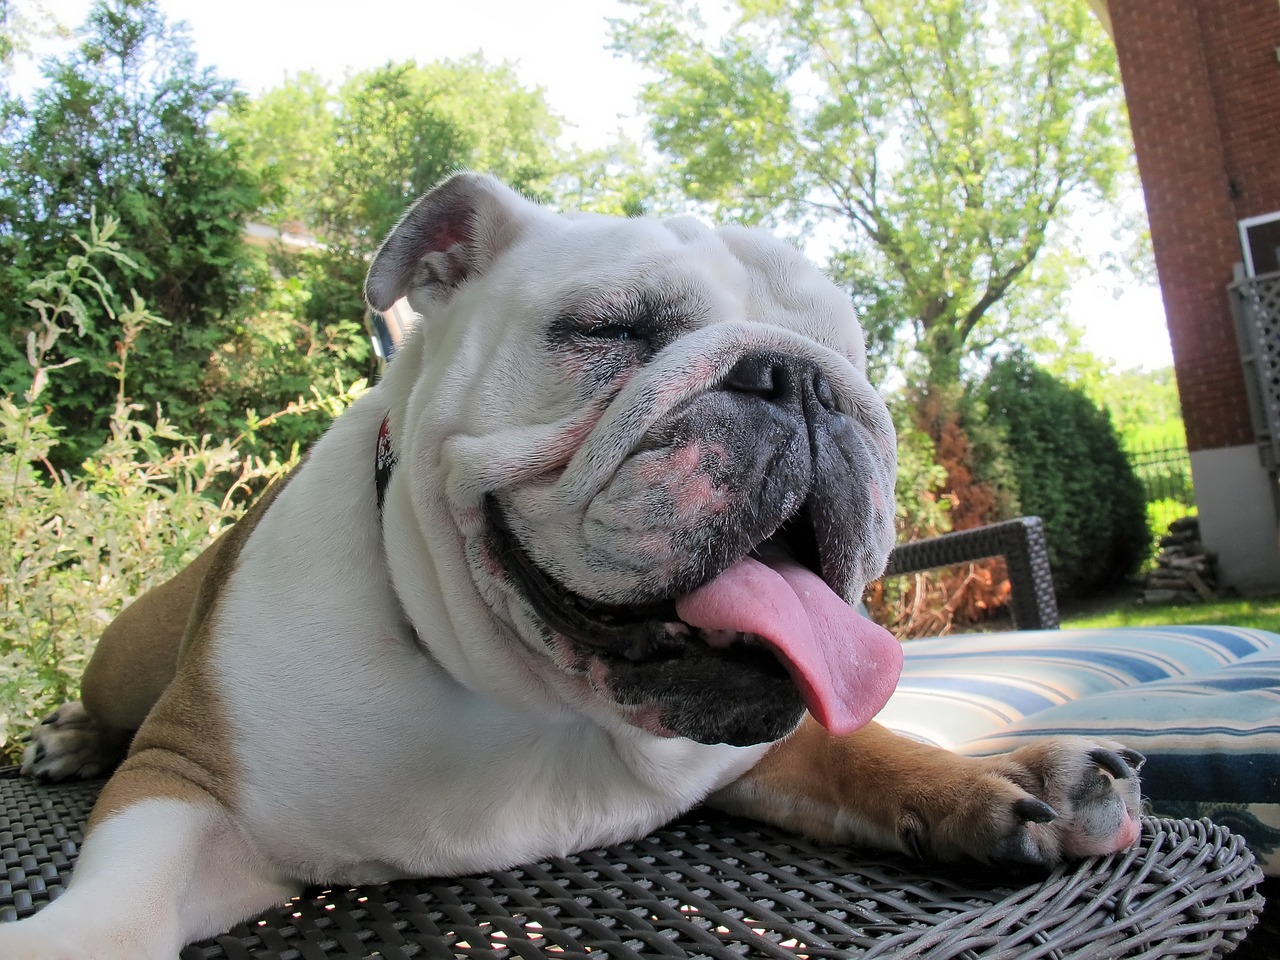 Bulldog Lifespan – What to Expect & How to Help a Bulldog Live Longer